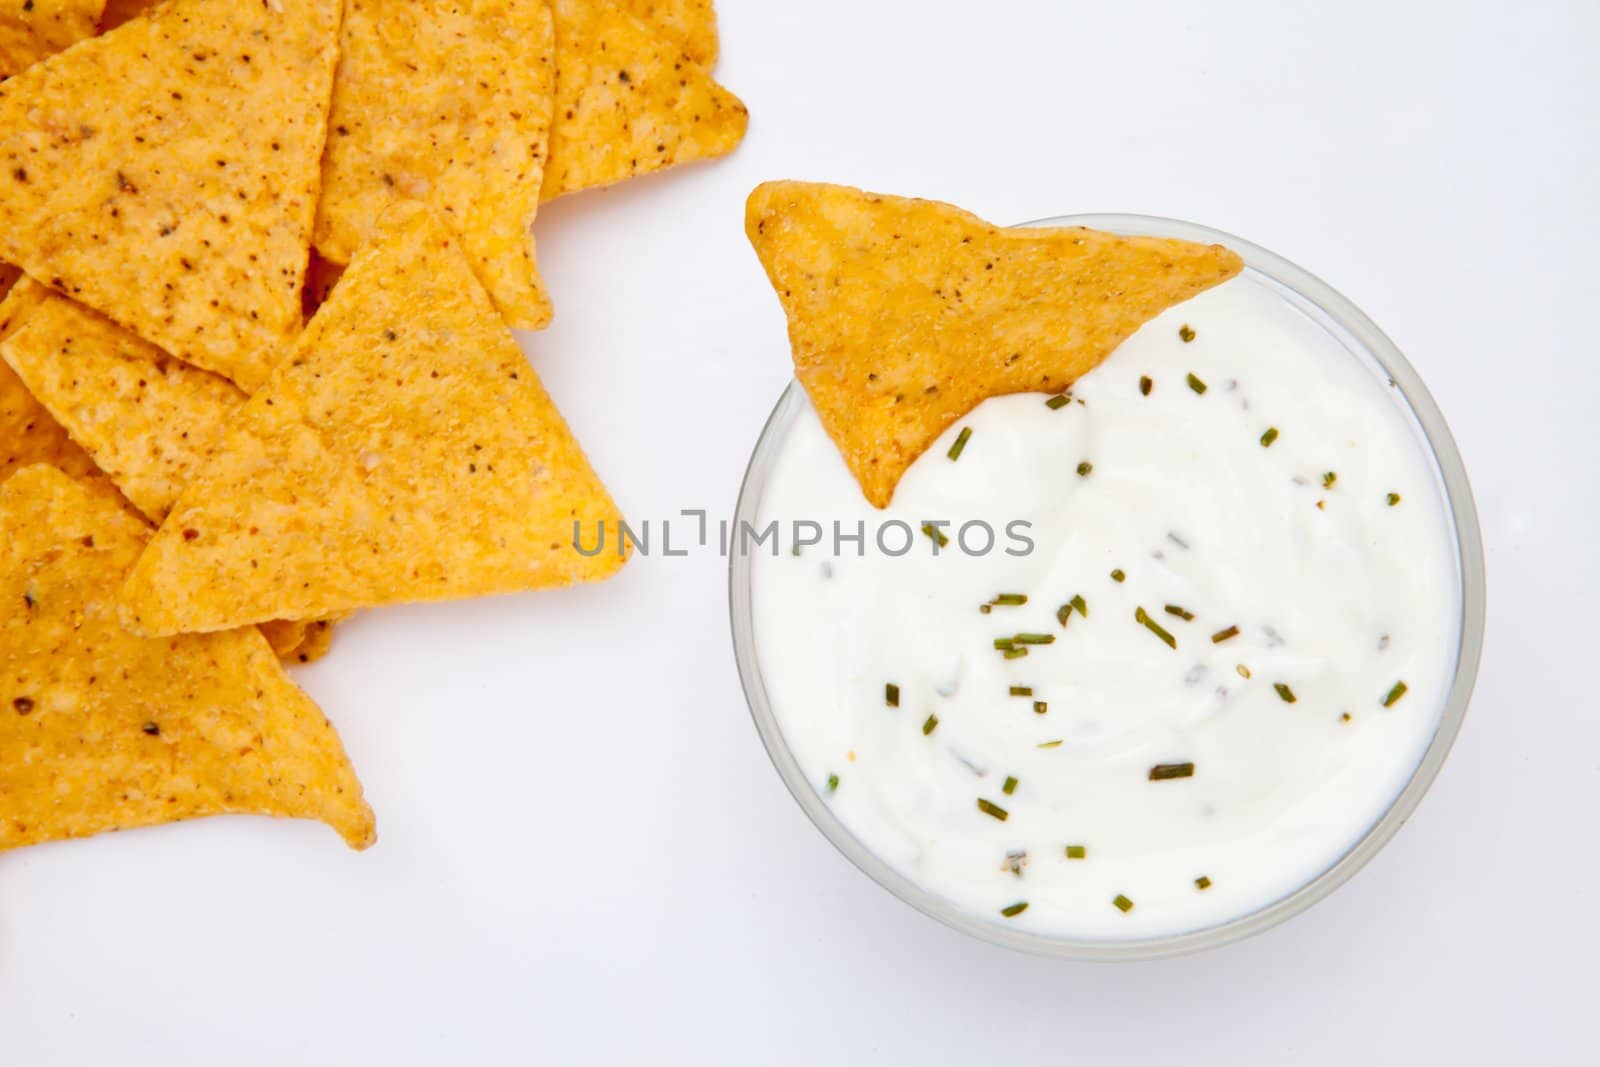 Bowl of dip with herbs with a nacho dipped in it against a white background